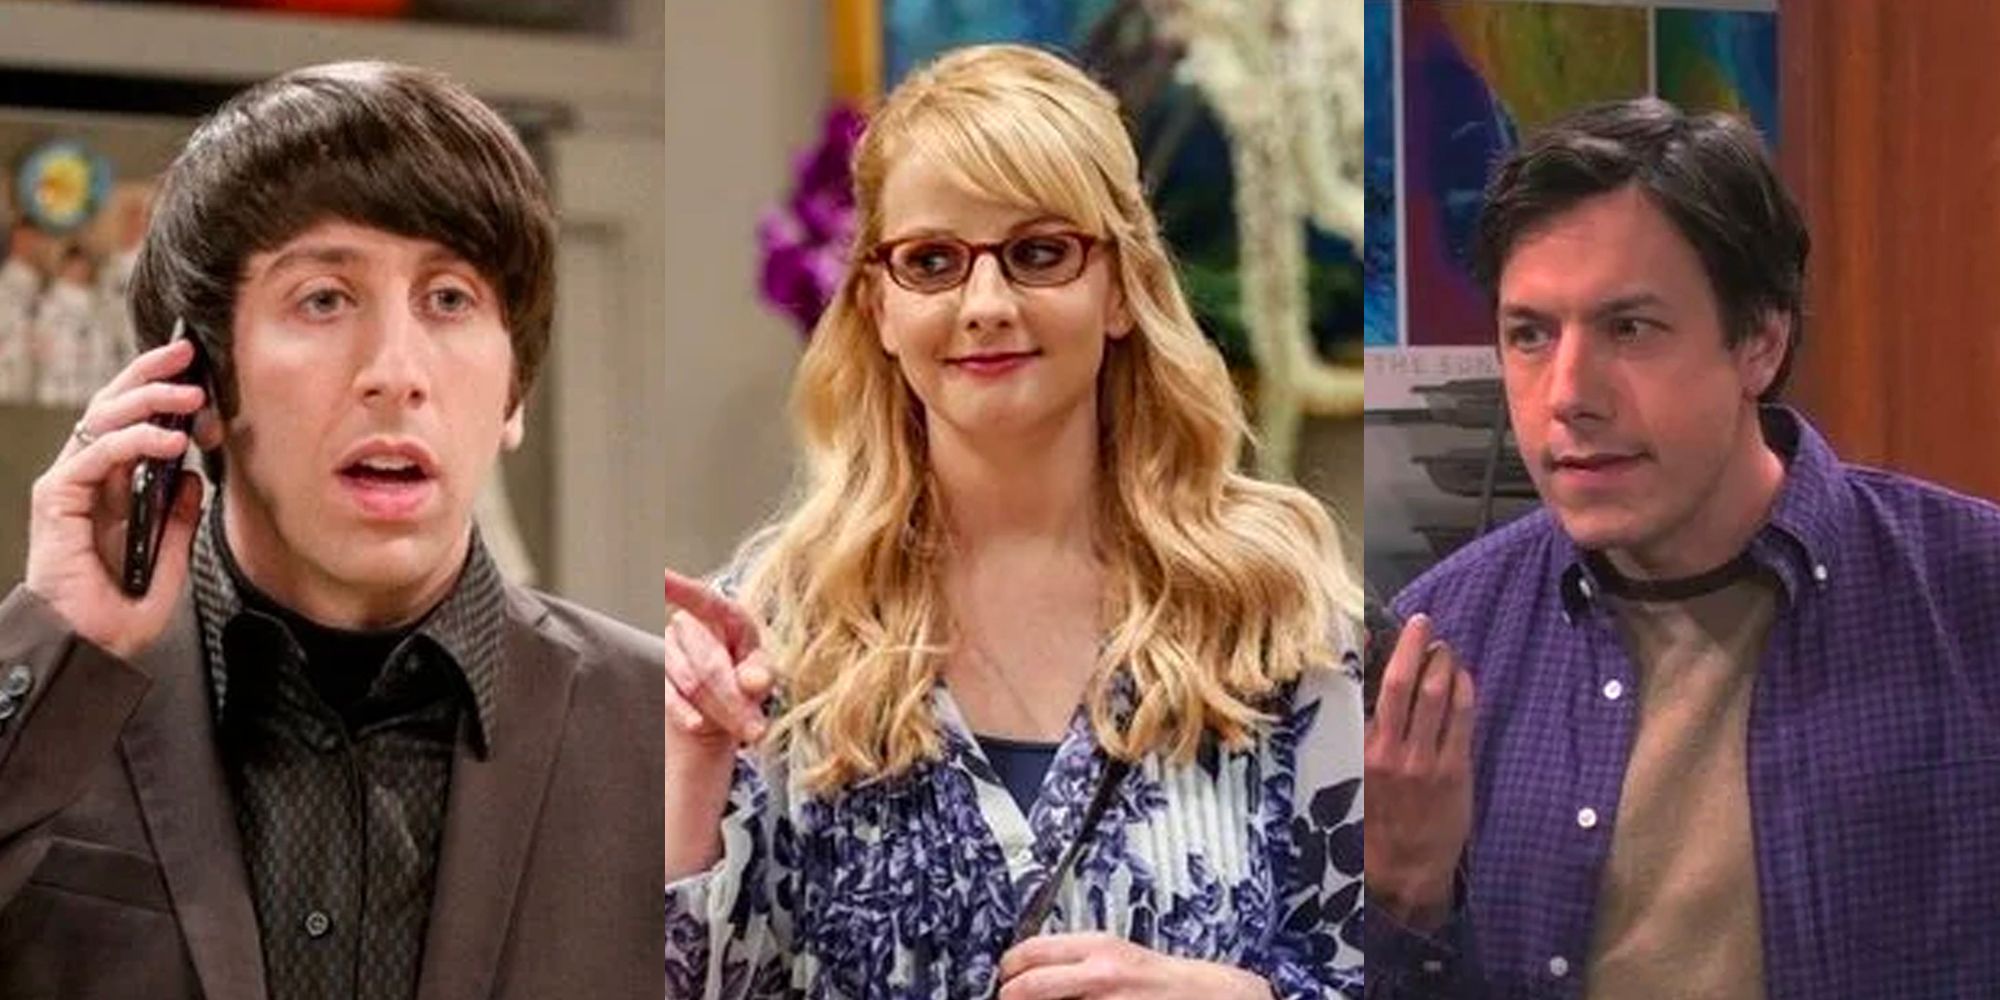 A collage of Howard, Bernadette, and Barry from Big Bang Theory